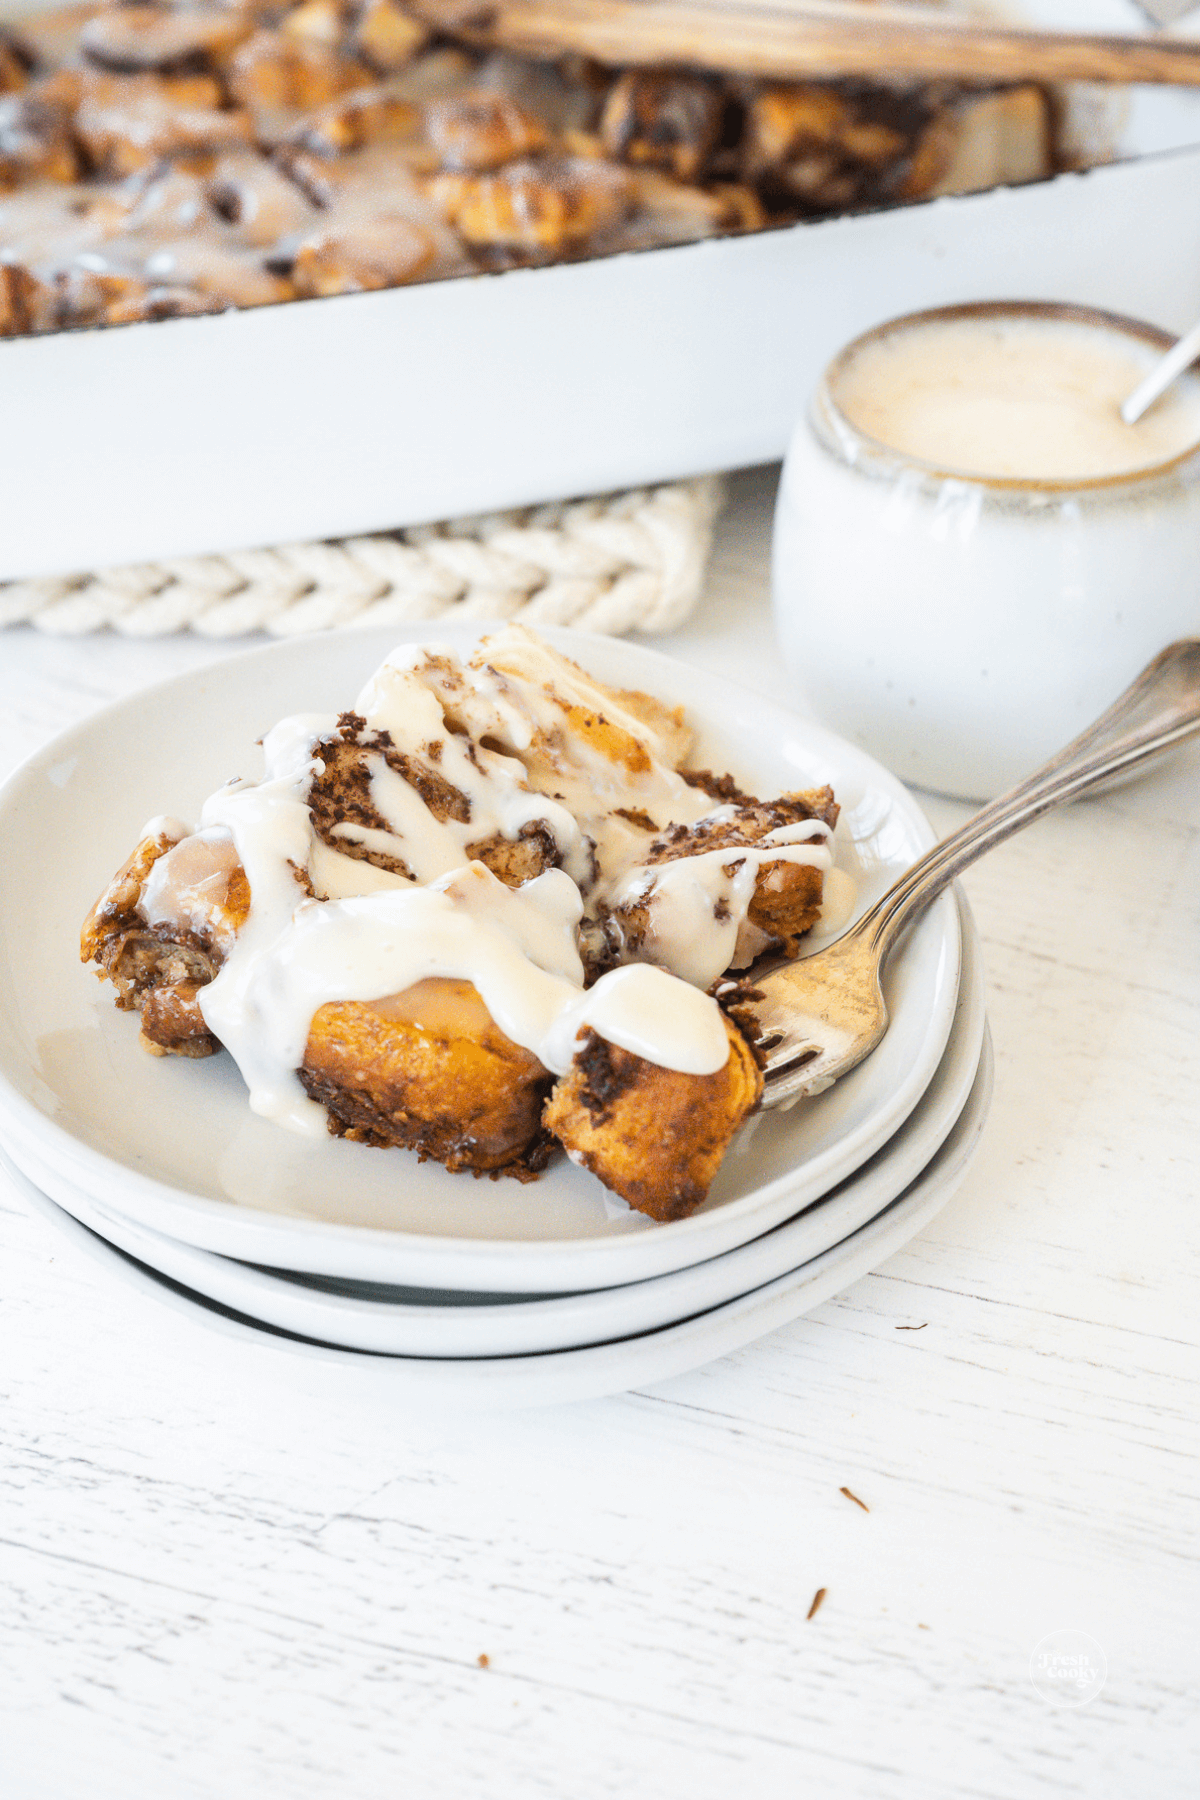 Slice of cinnamon roll casserole on plate with a fork-filled bite.